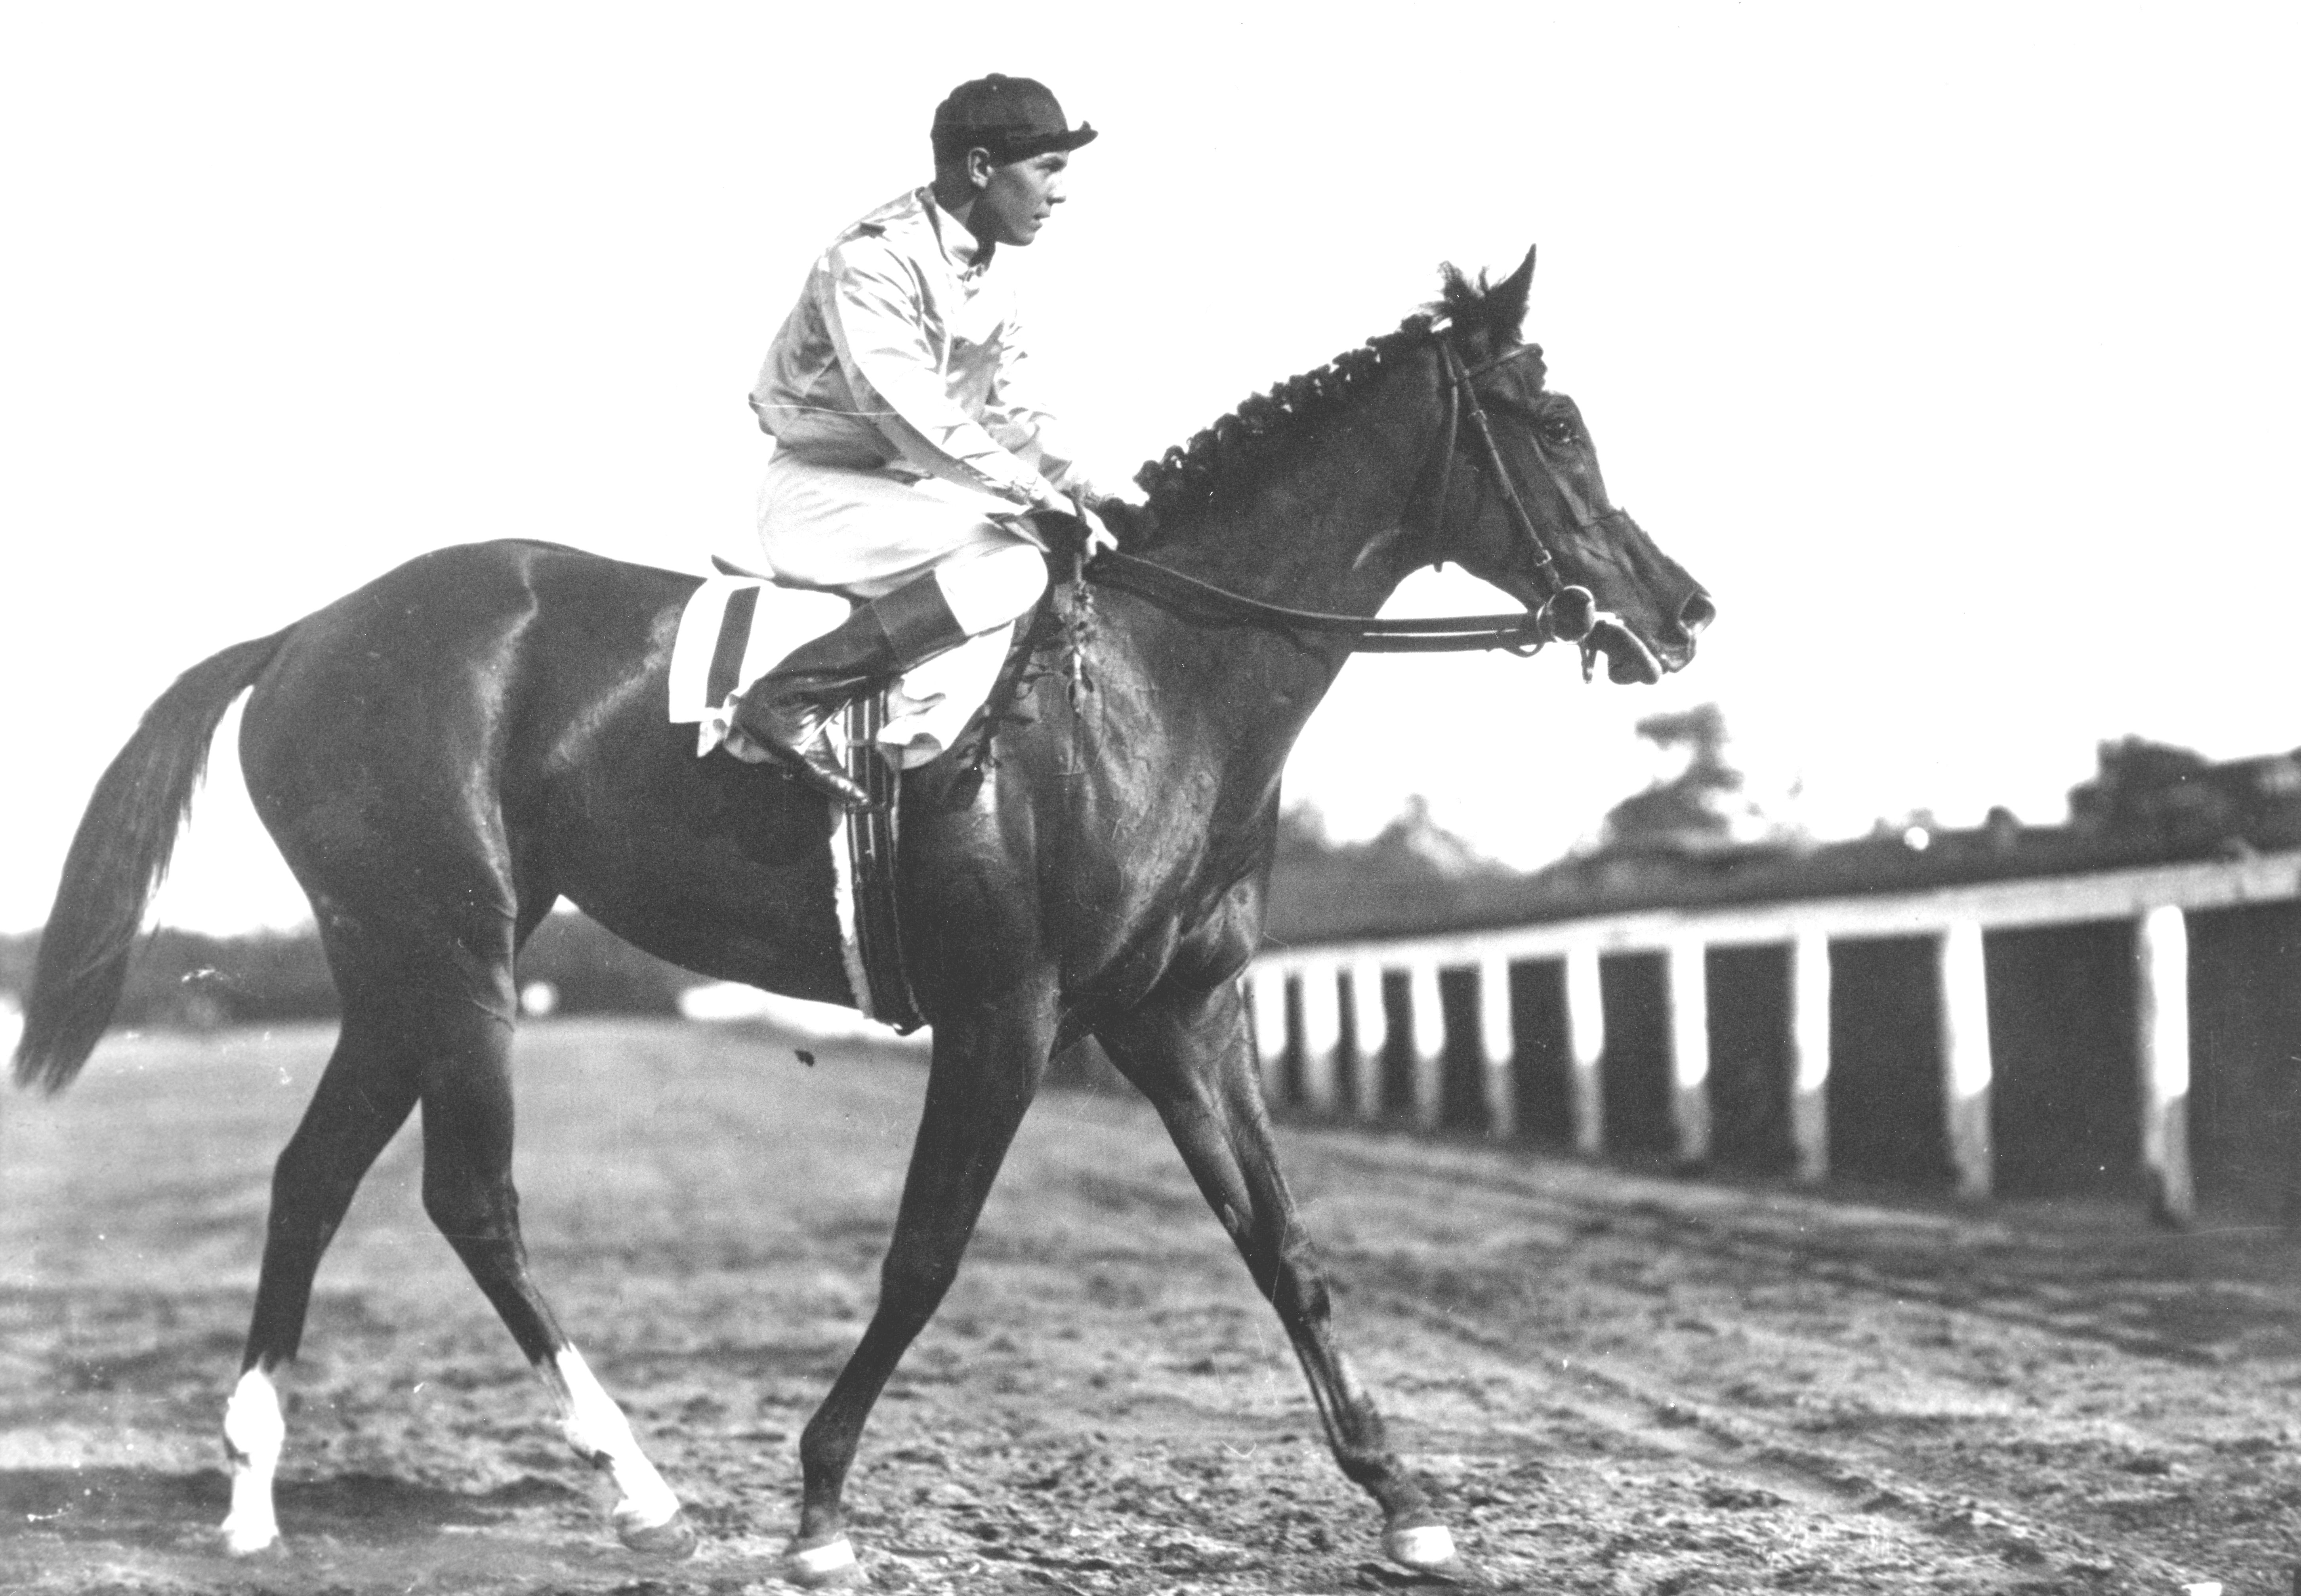 Top Flight with Raymond Workman up (Keeneland Library Cook Collection/Museum Collection)